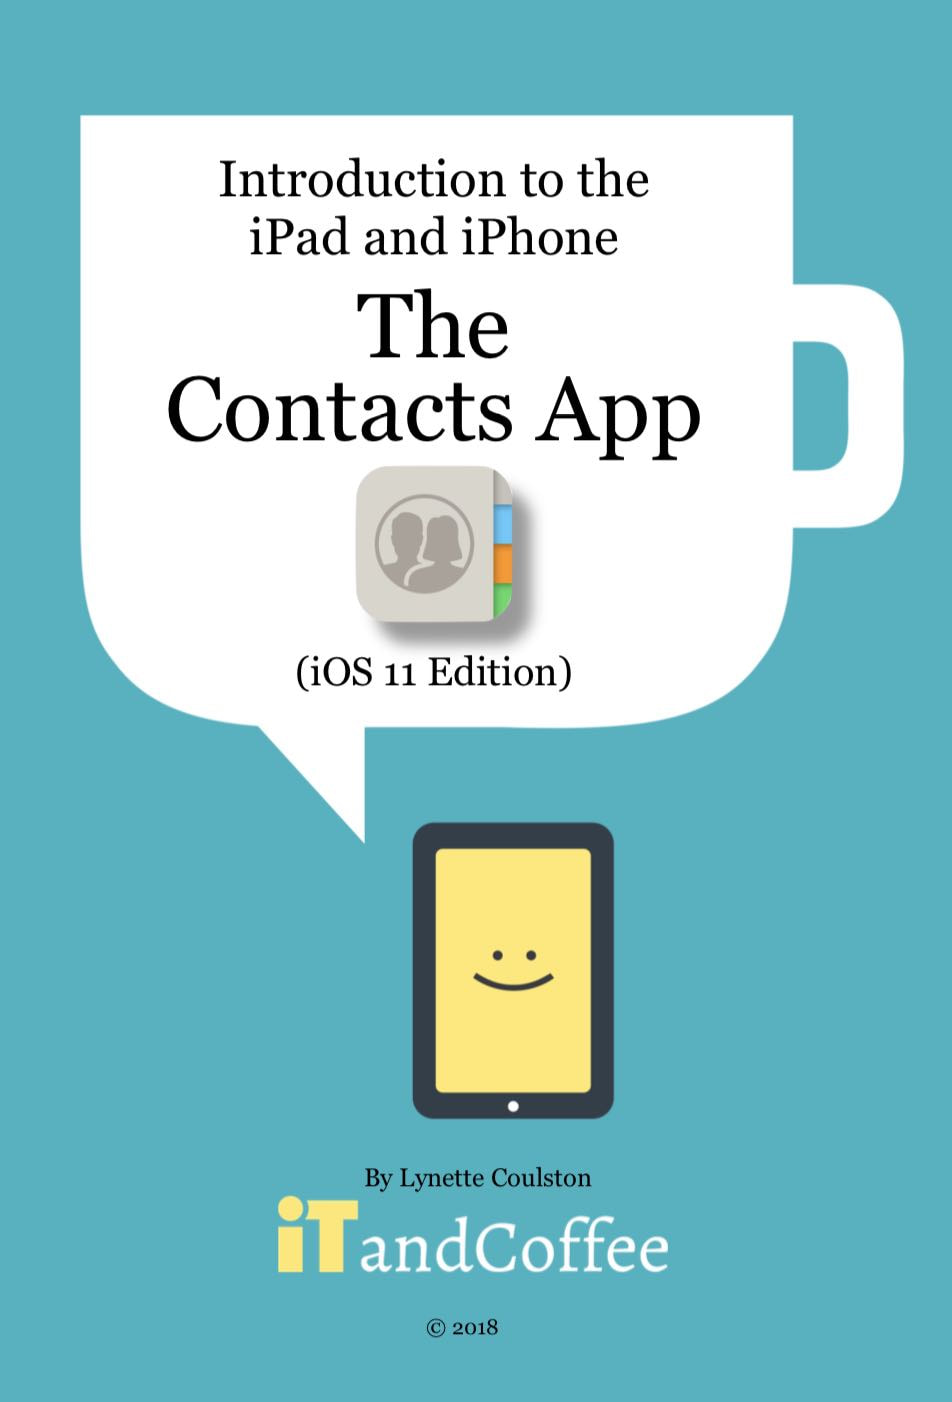 A guide to the Contacts app on the iPad and iPhone